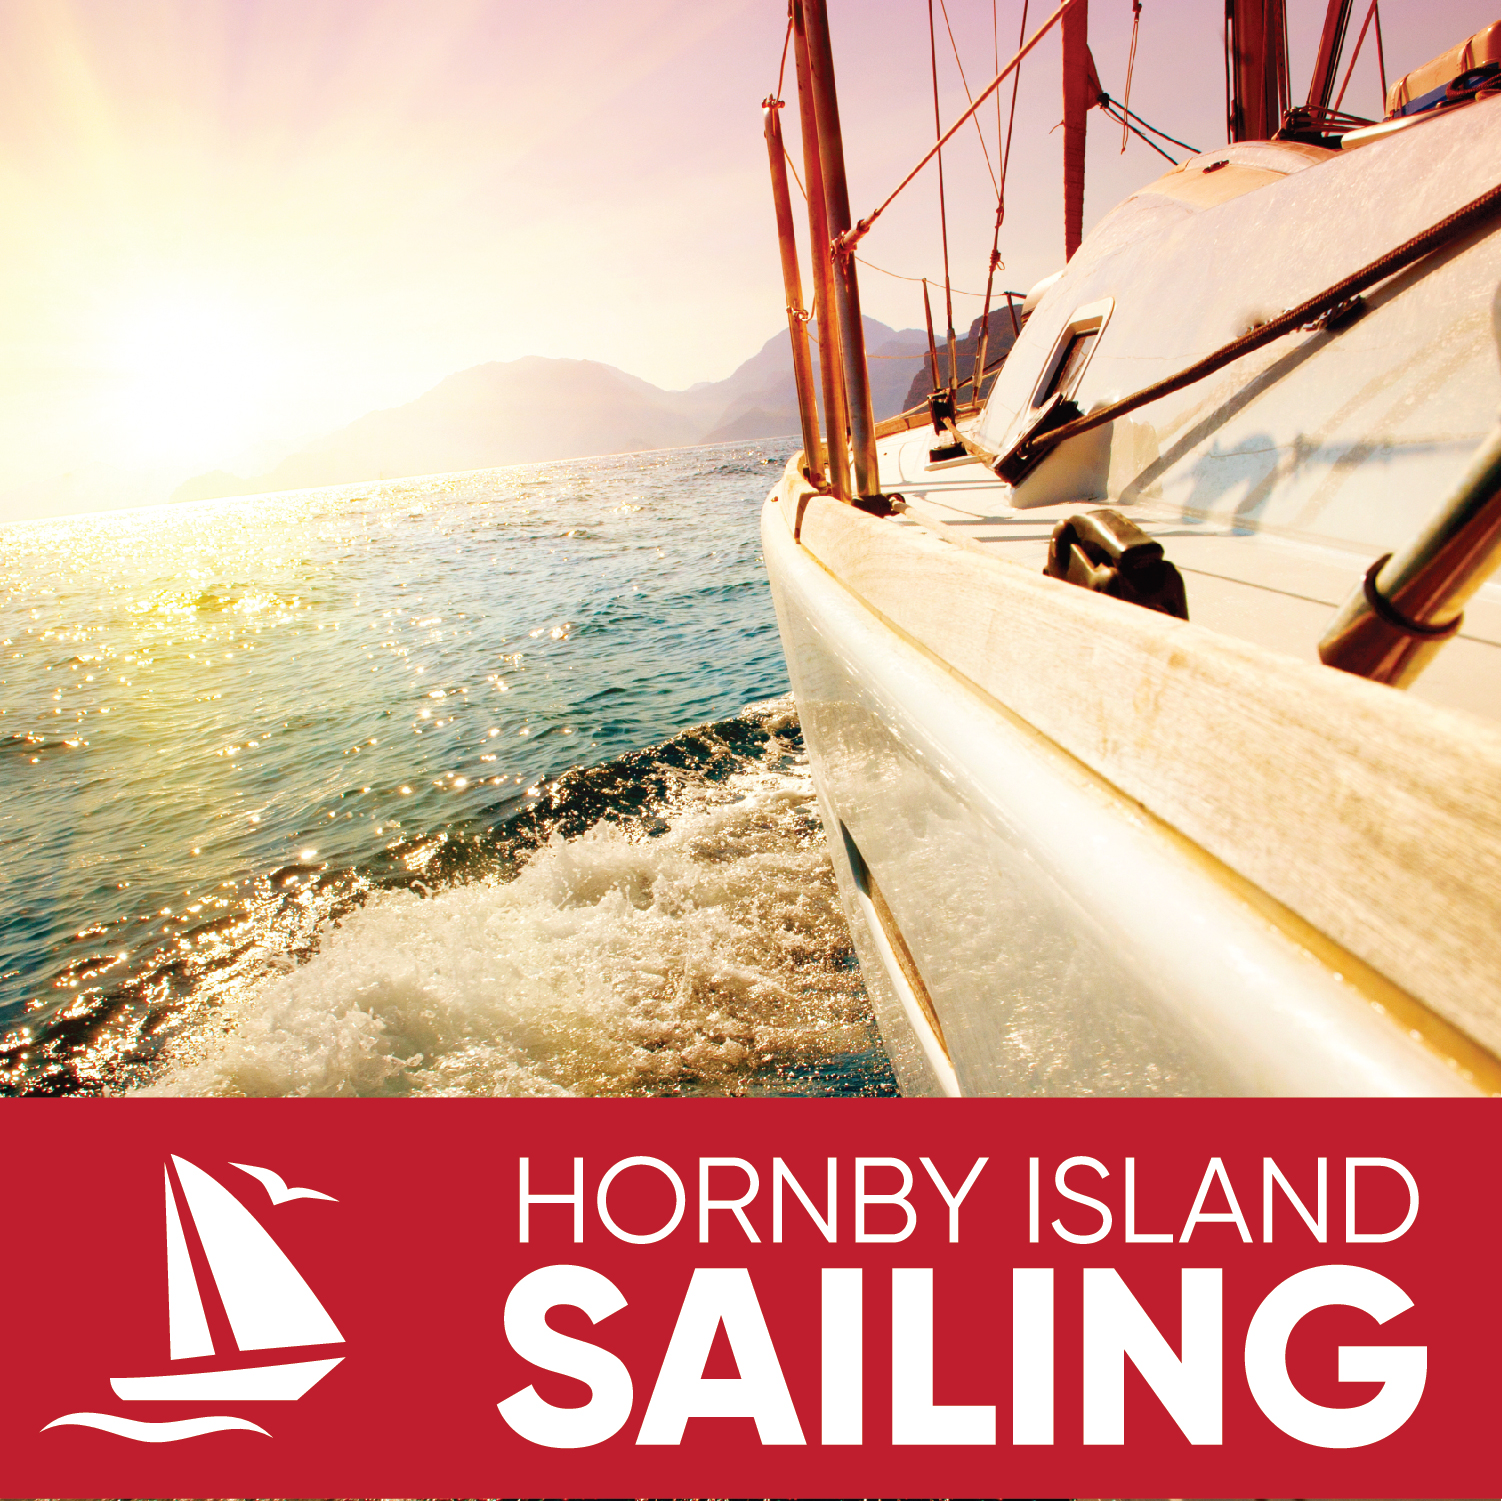 HORNBY ISLAND SAILING by bl3nd design graphic design agency in abbotsford british columbia canada